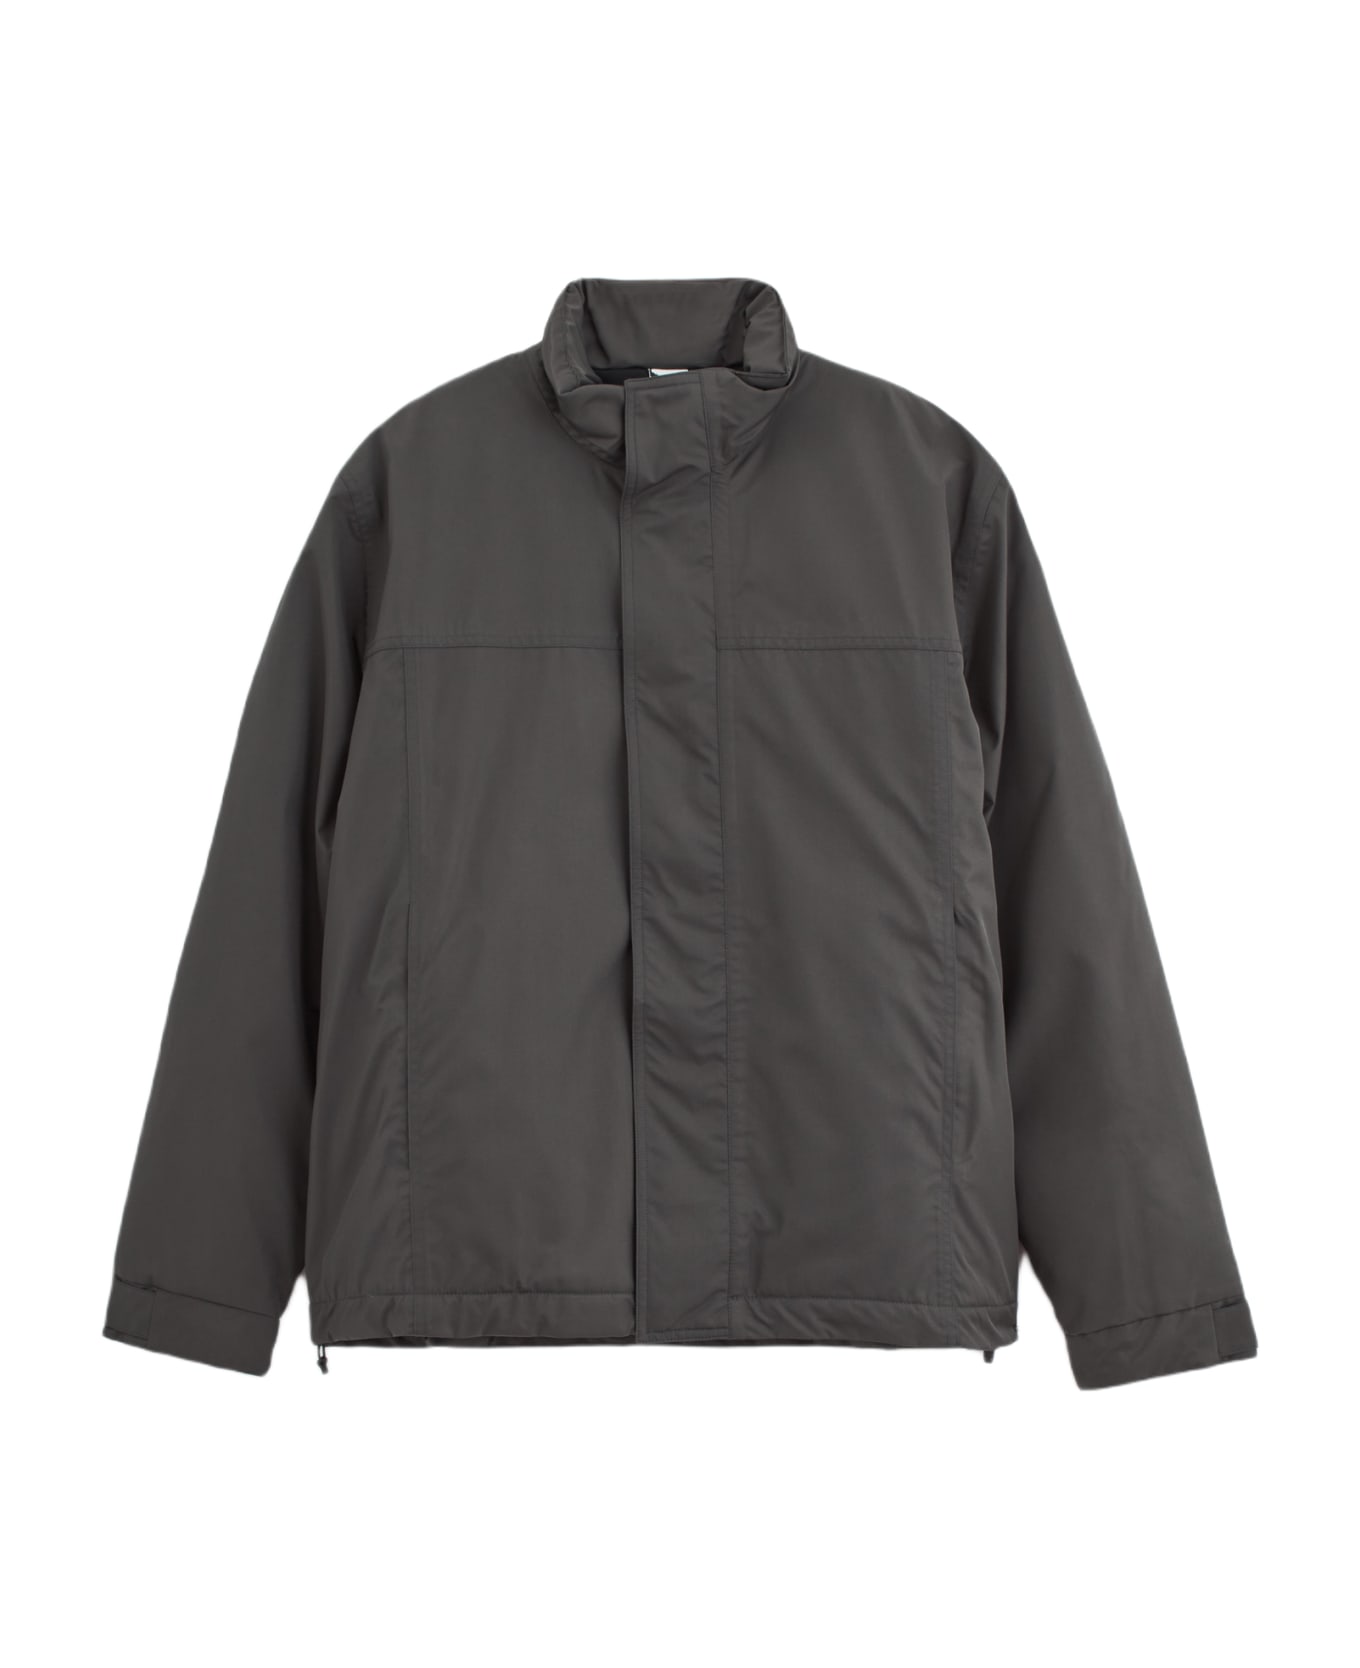 GR10K Insulated Padded Jacket - Coal grey ブレザー